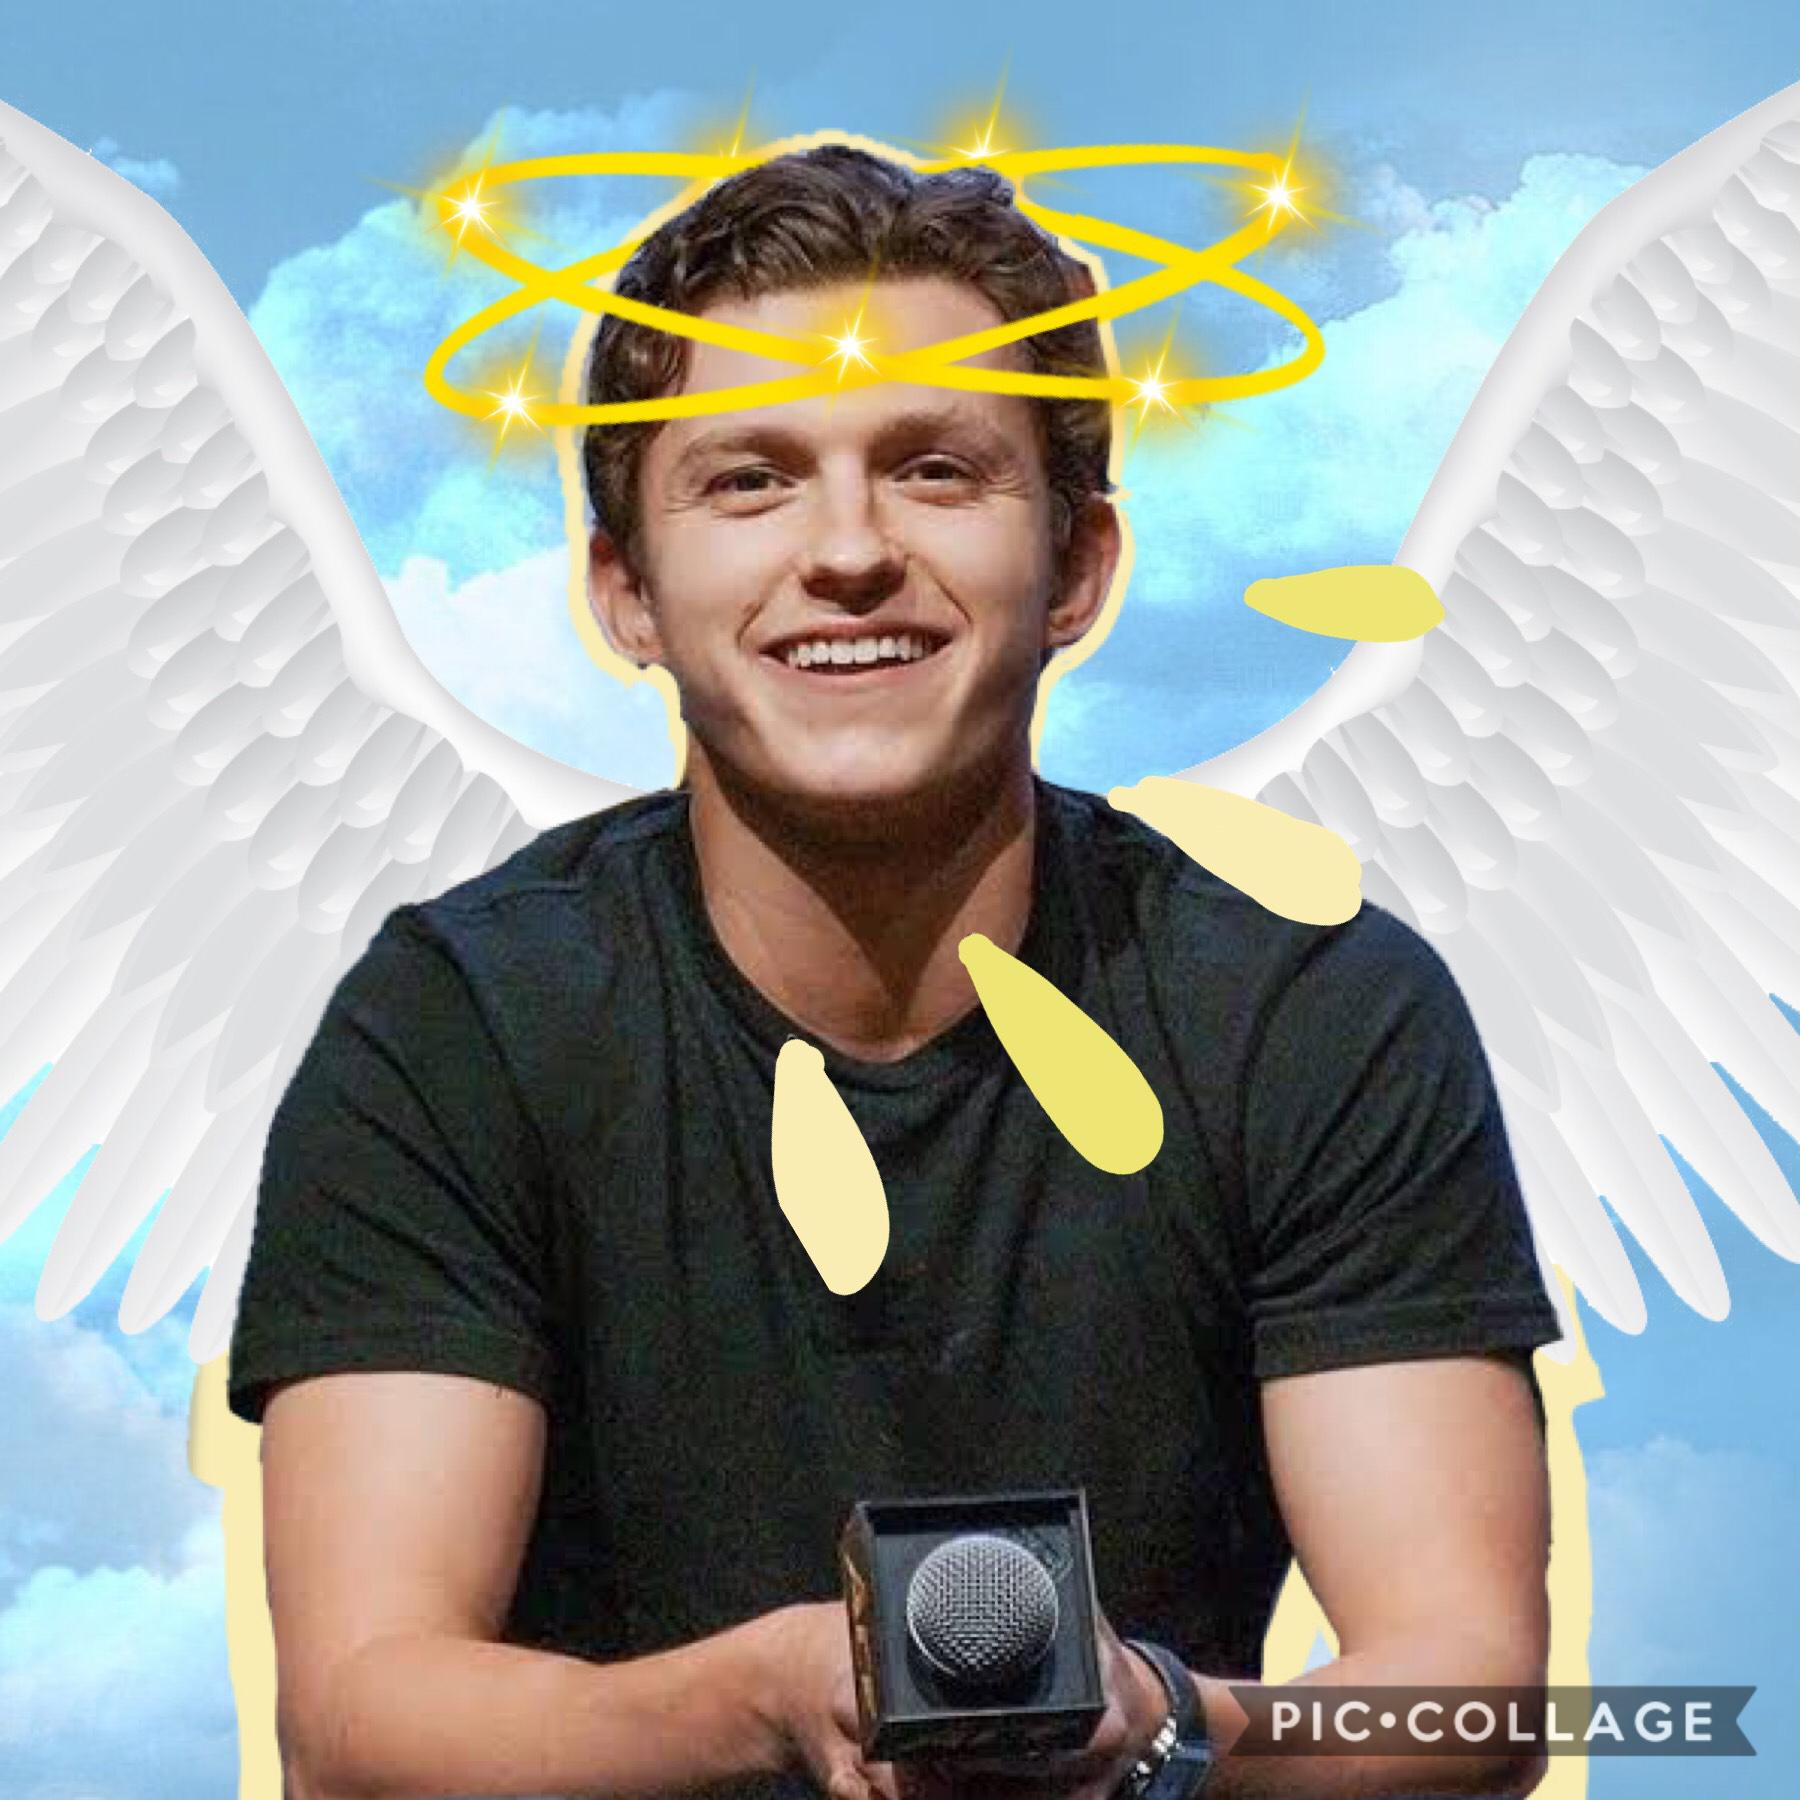 TAPPY💫💫

Don’t really know what this...
But Tom, ur an angel😍🥰😇